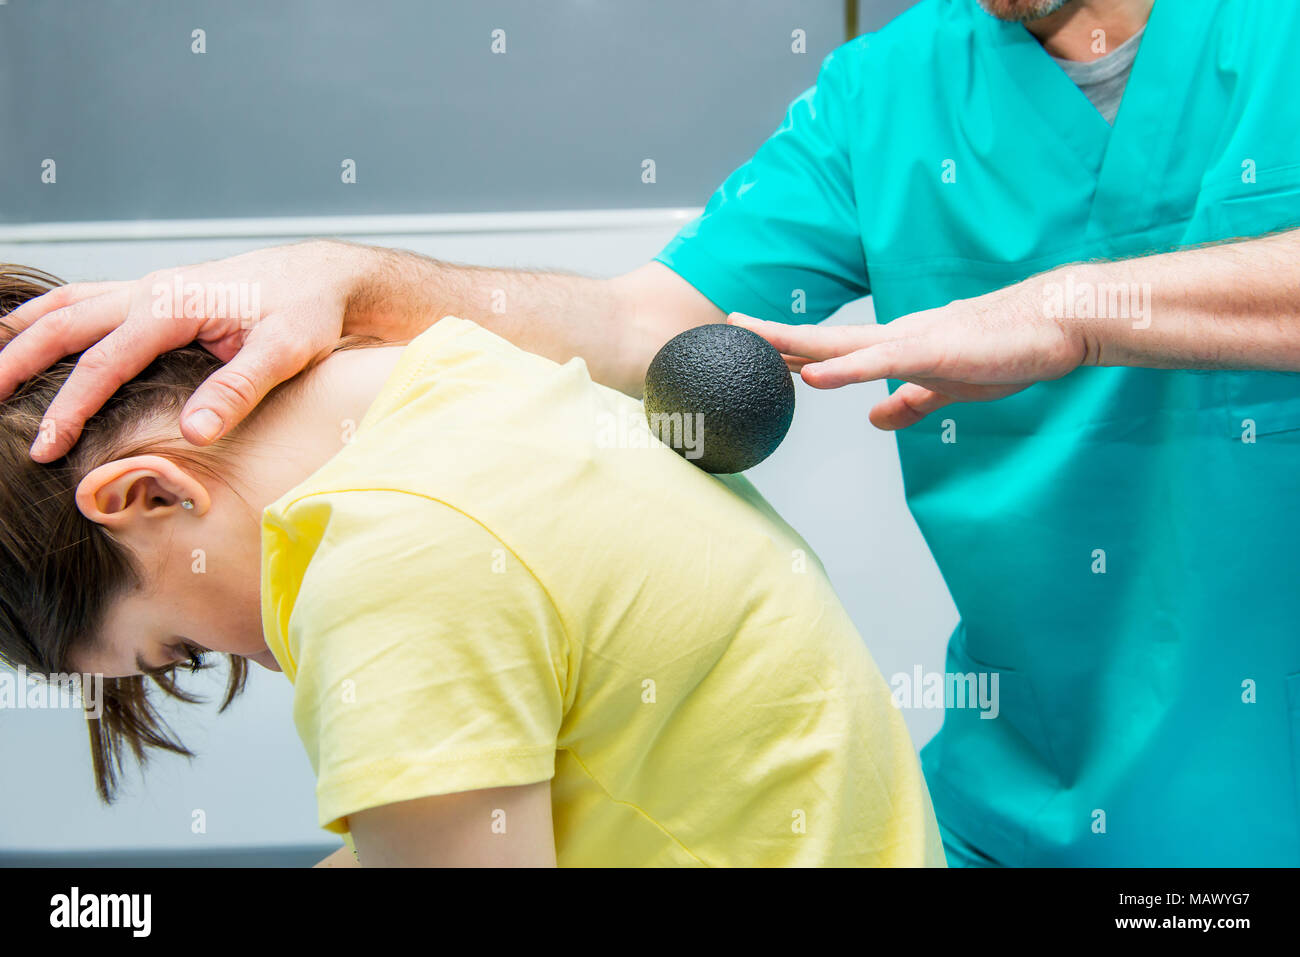 Woman at the physiotherapy receiving ball massage from therapist. A chiropractor treats patient's thoracic spine in medical office. Neurology, Osteopa Stock Photo